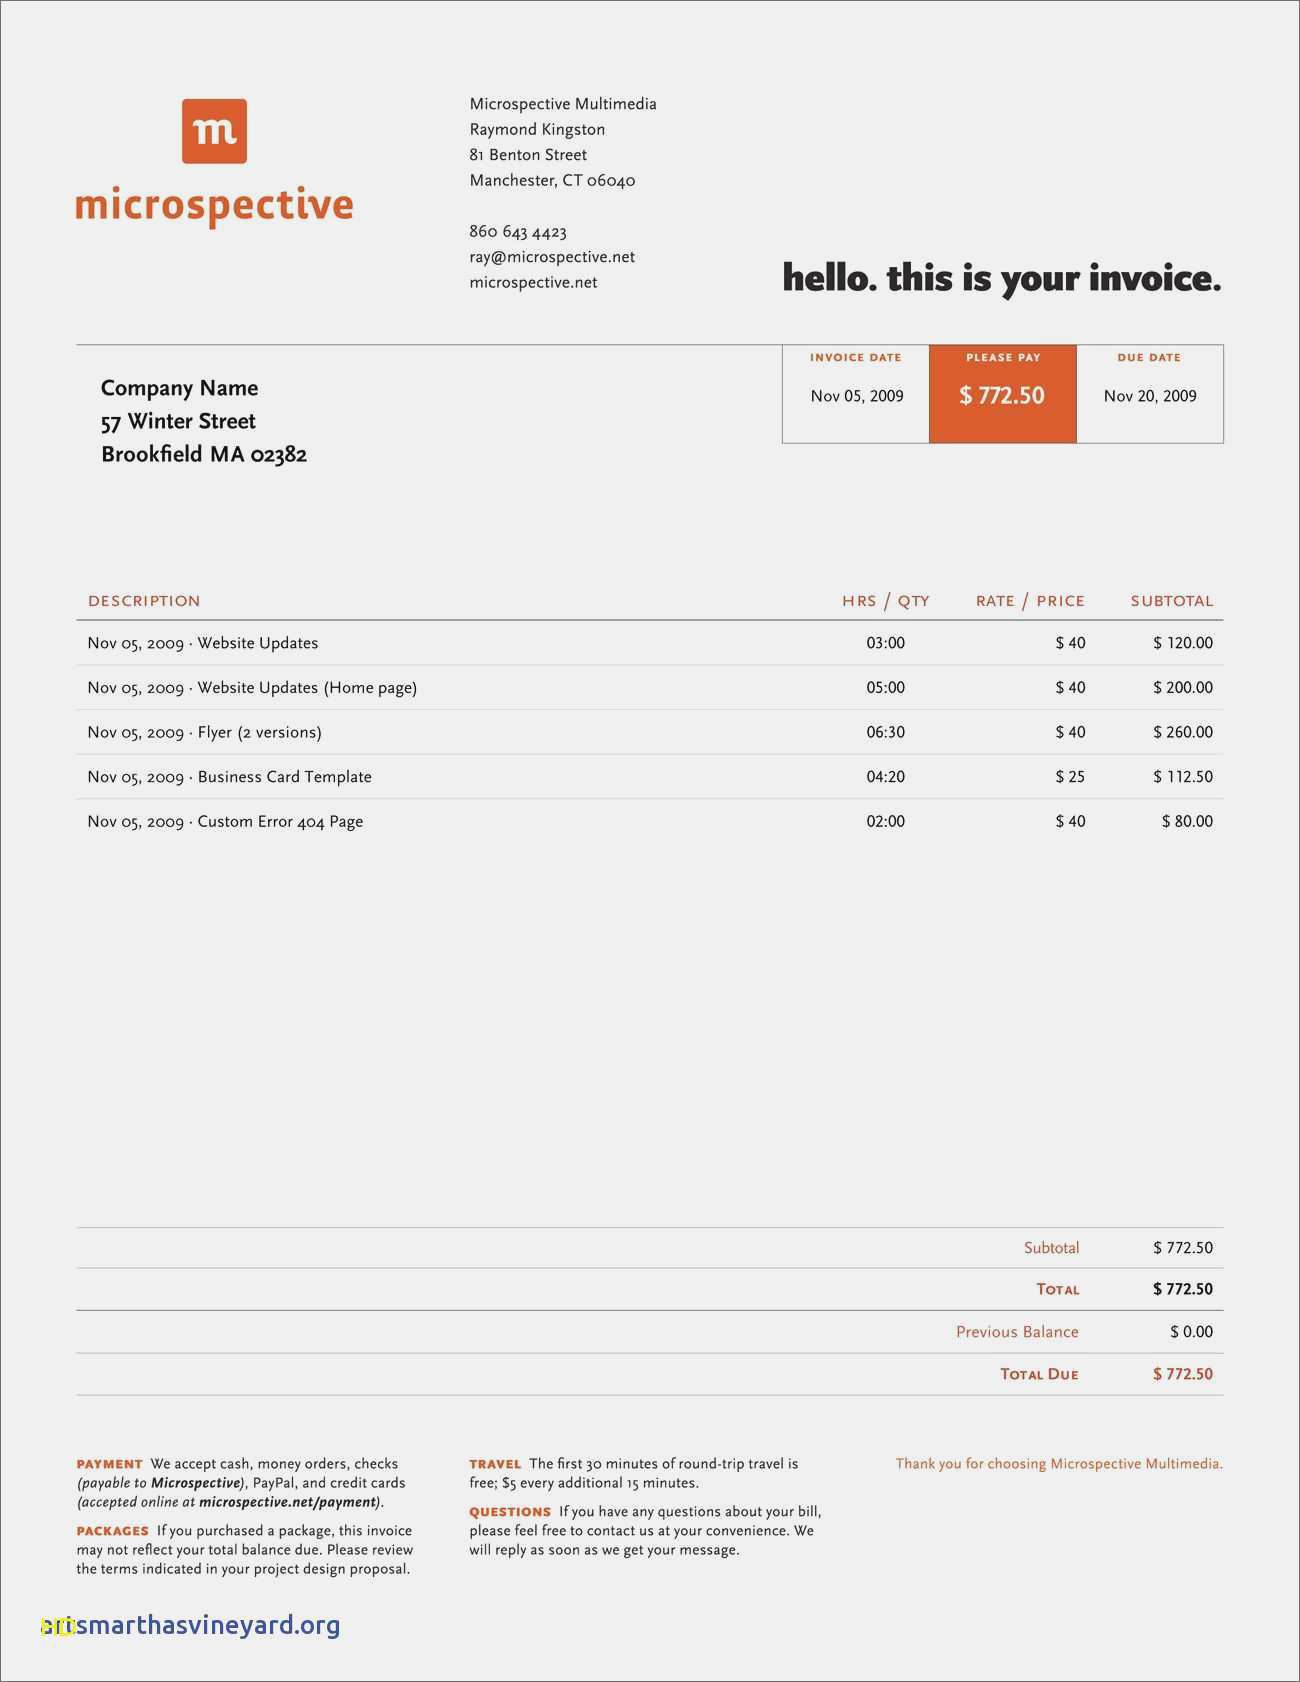 15 Customize Our Free Invoice Template For A Freelance Designer Formating with Invoice Template For A Freelance Designer